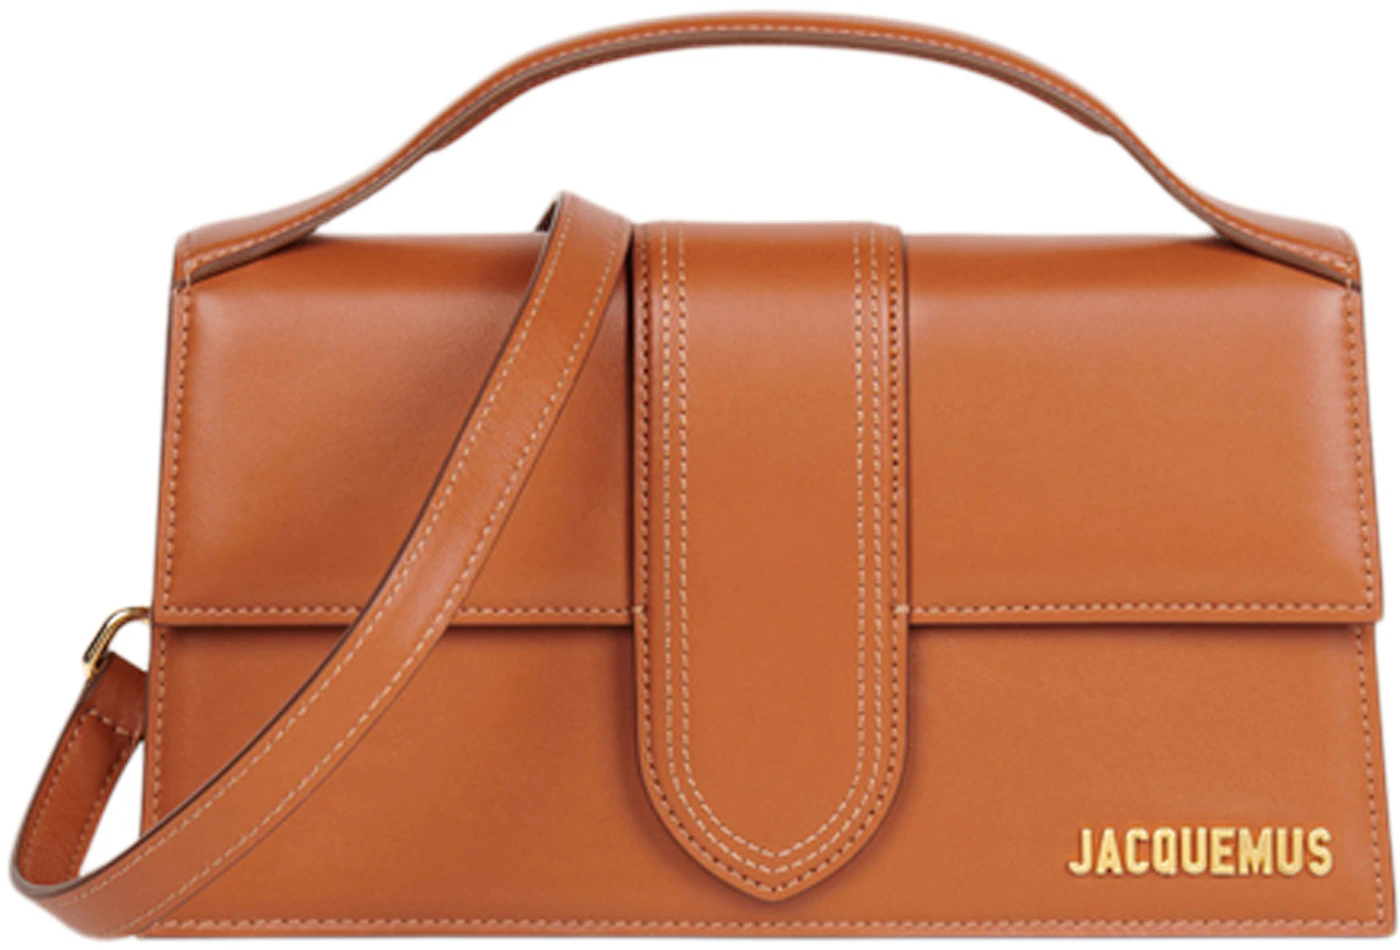 Jacquemus Le Grand Bambino review - Yours truly, Aya